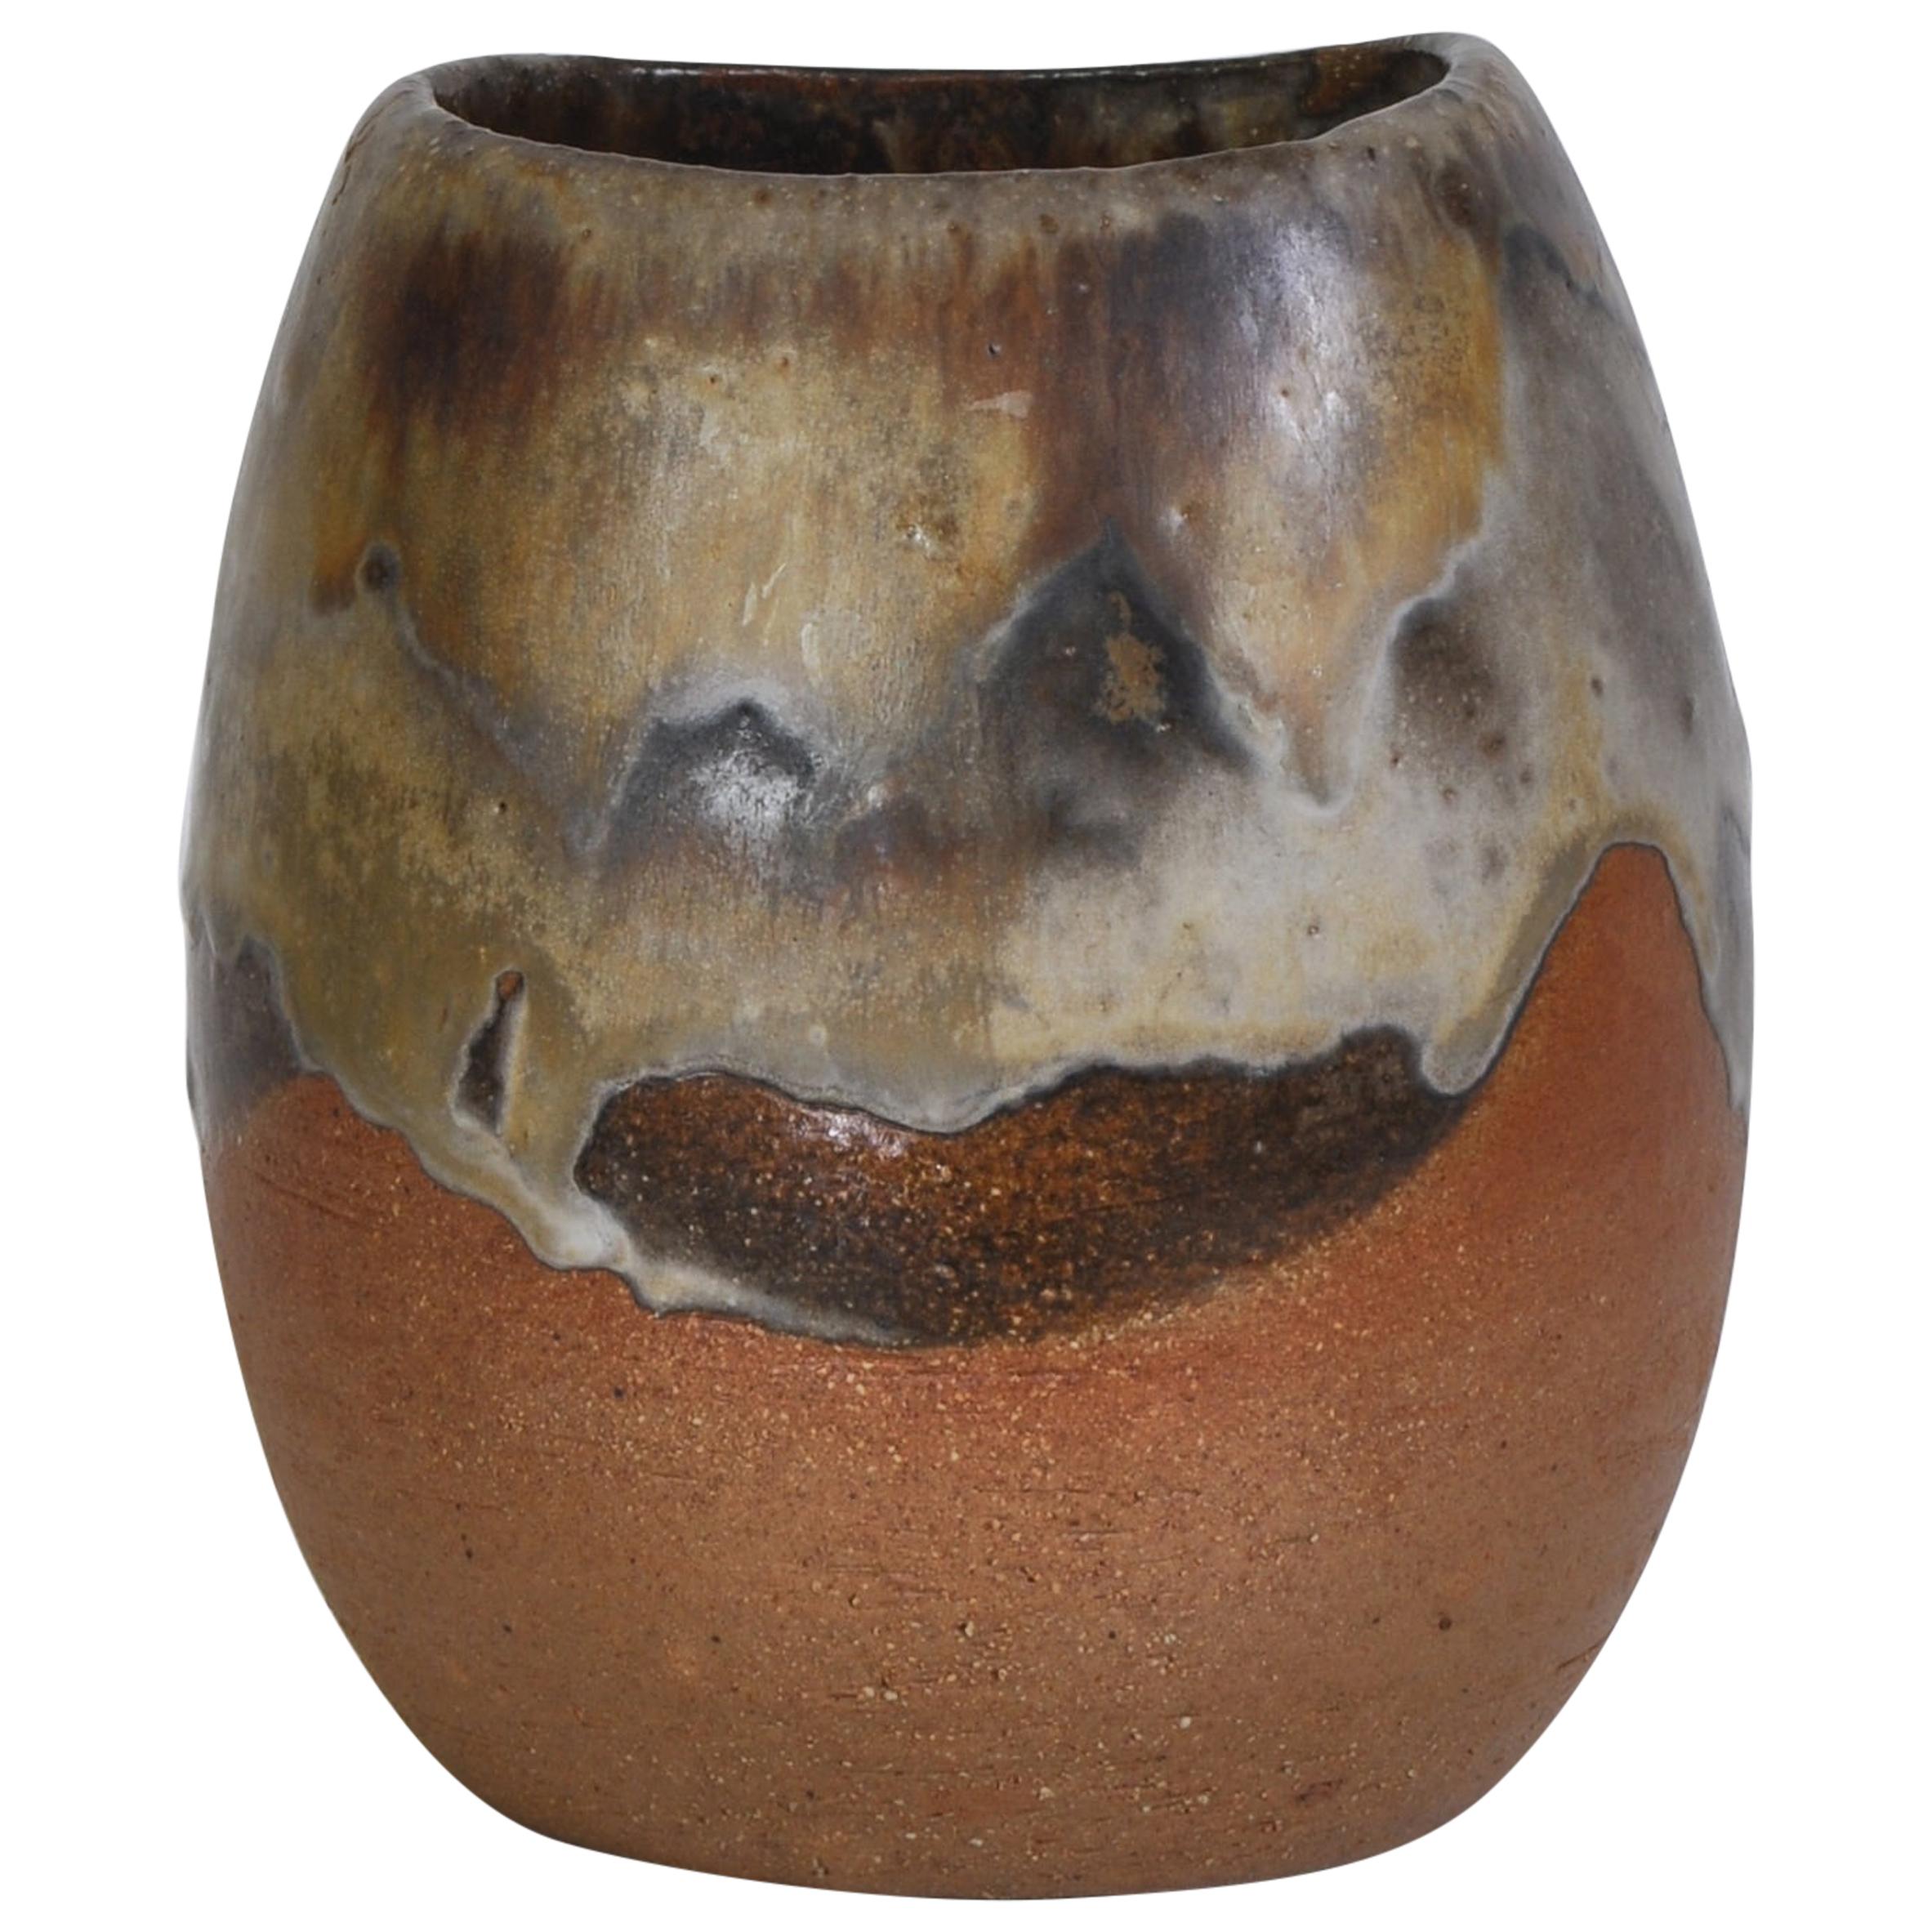 1970s "Axella" Organic Stoneware Vase in Earth Colors by Aksel Larsen, Denmark For Sale